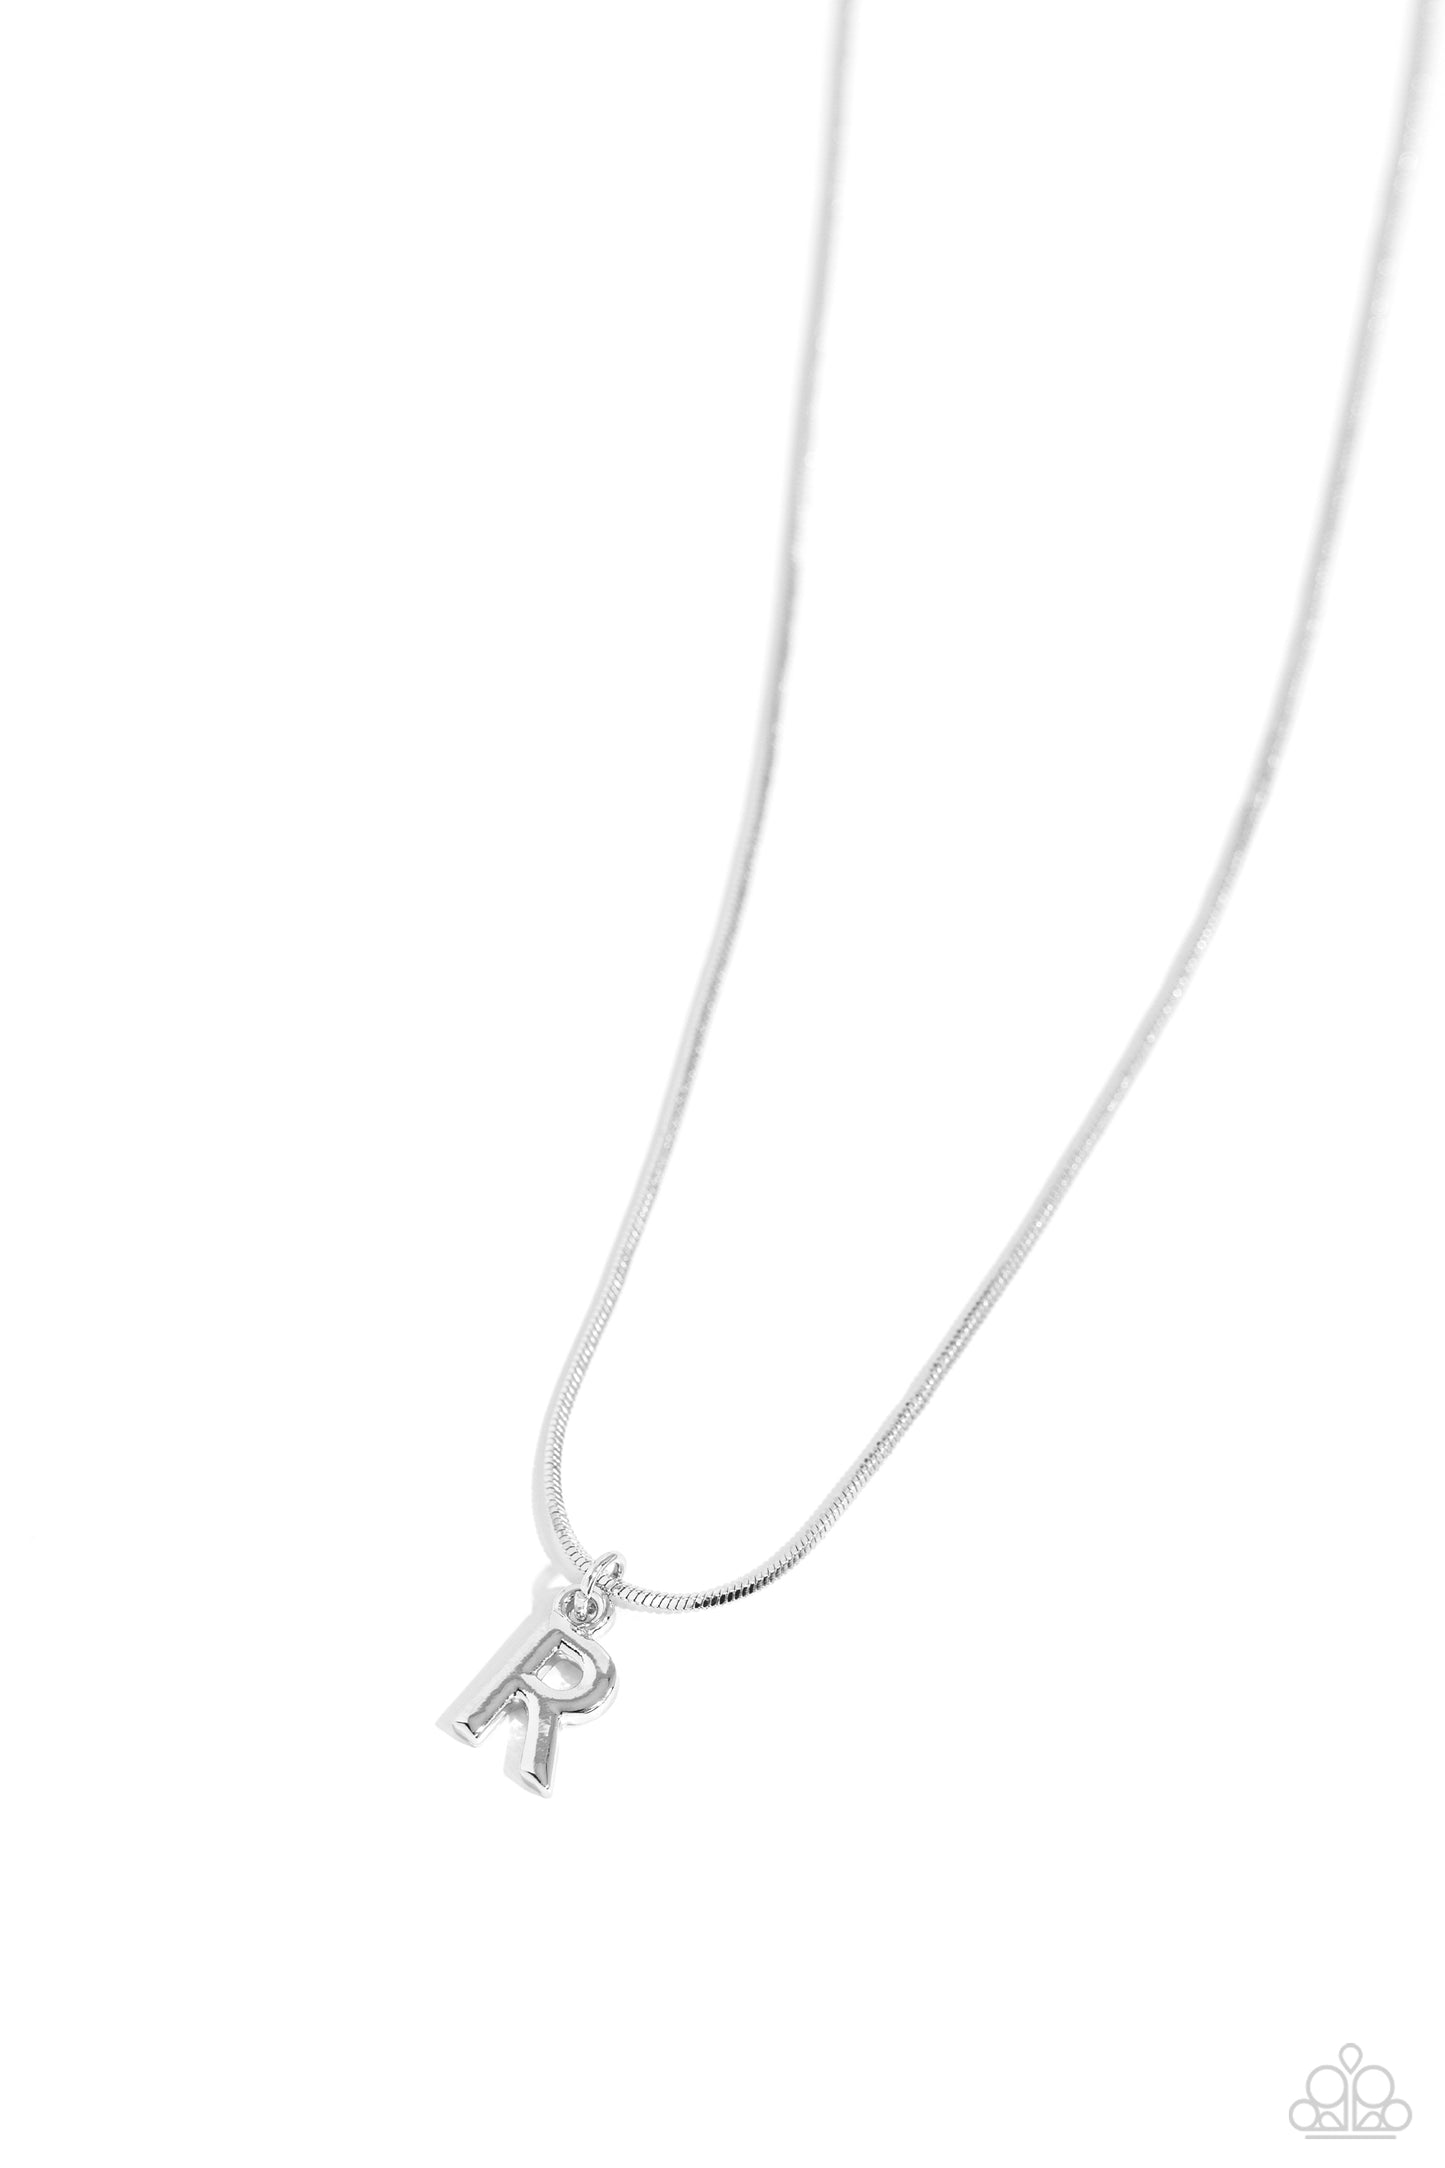 Seize the Initial - Silver - R Necklace